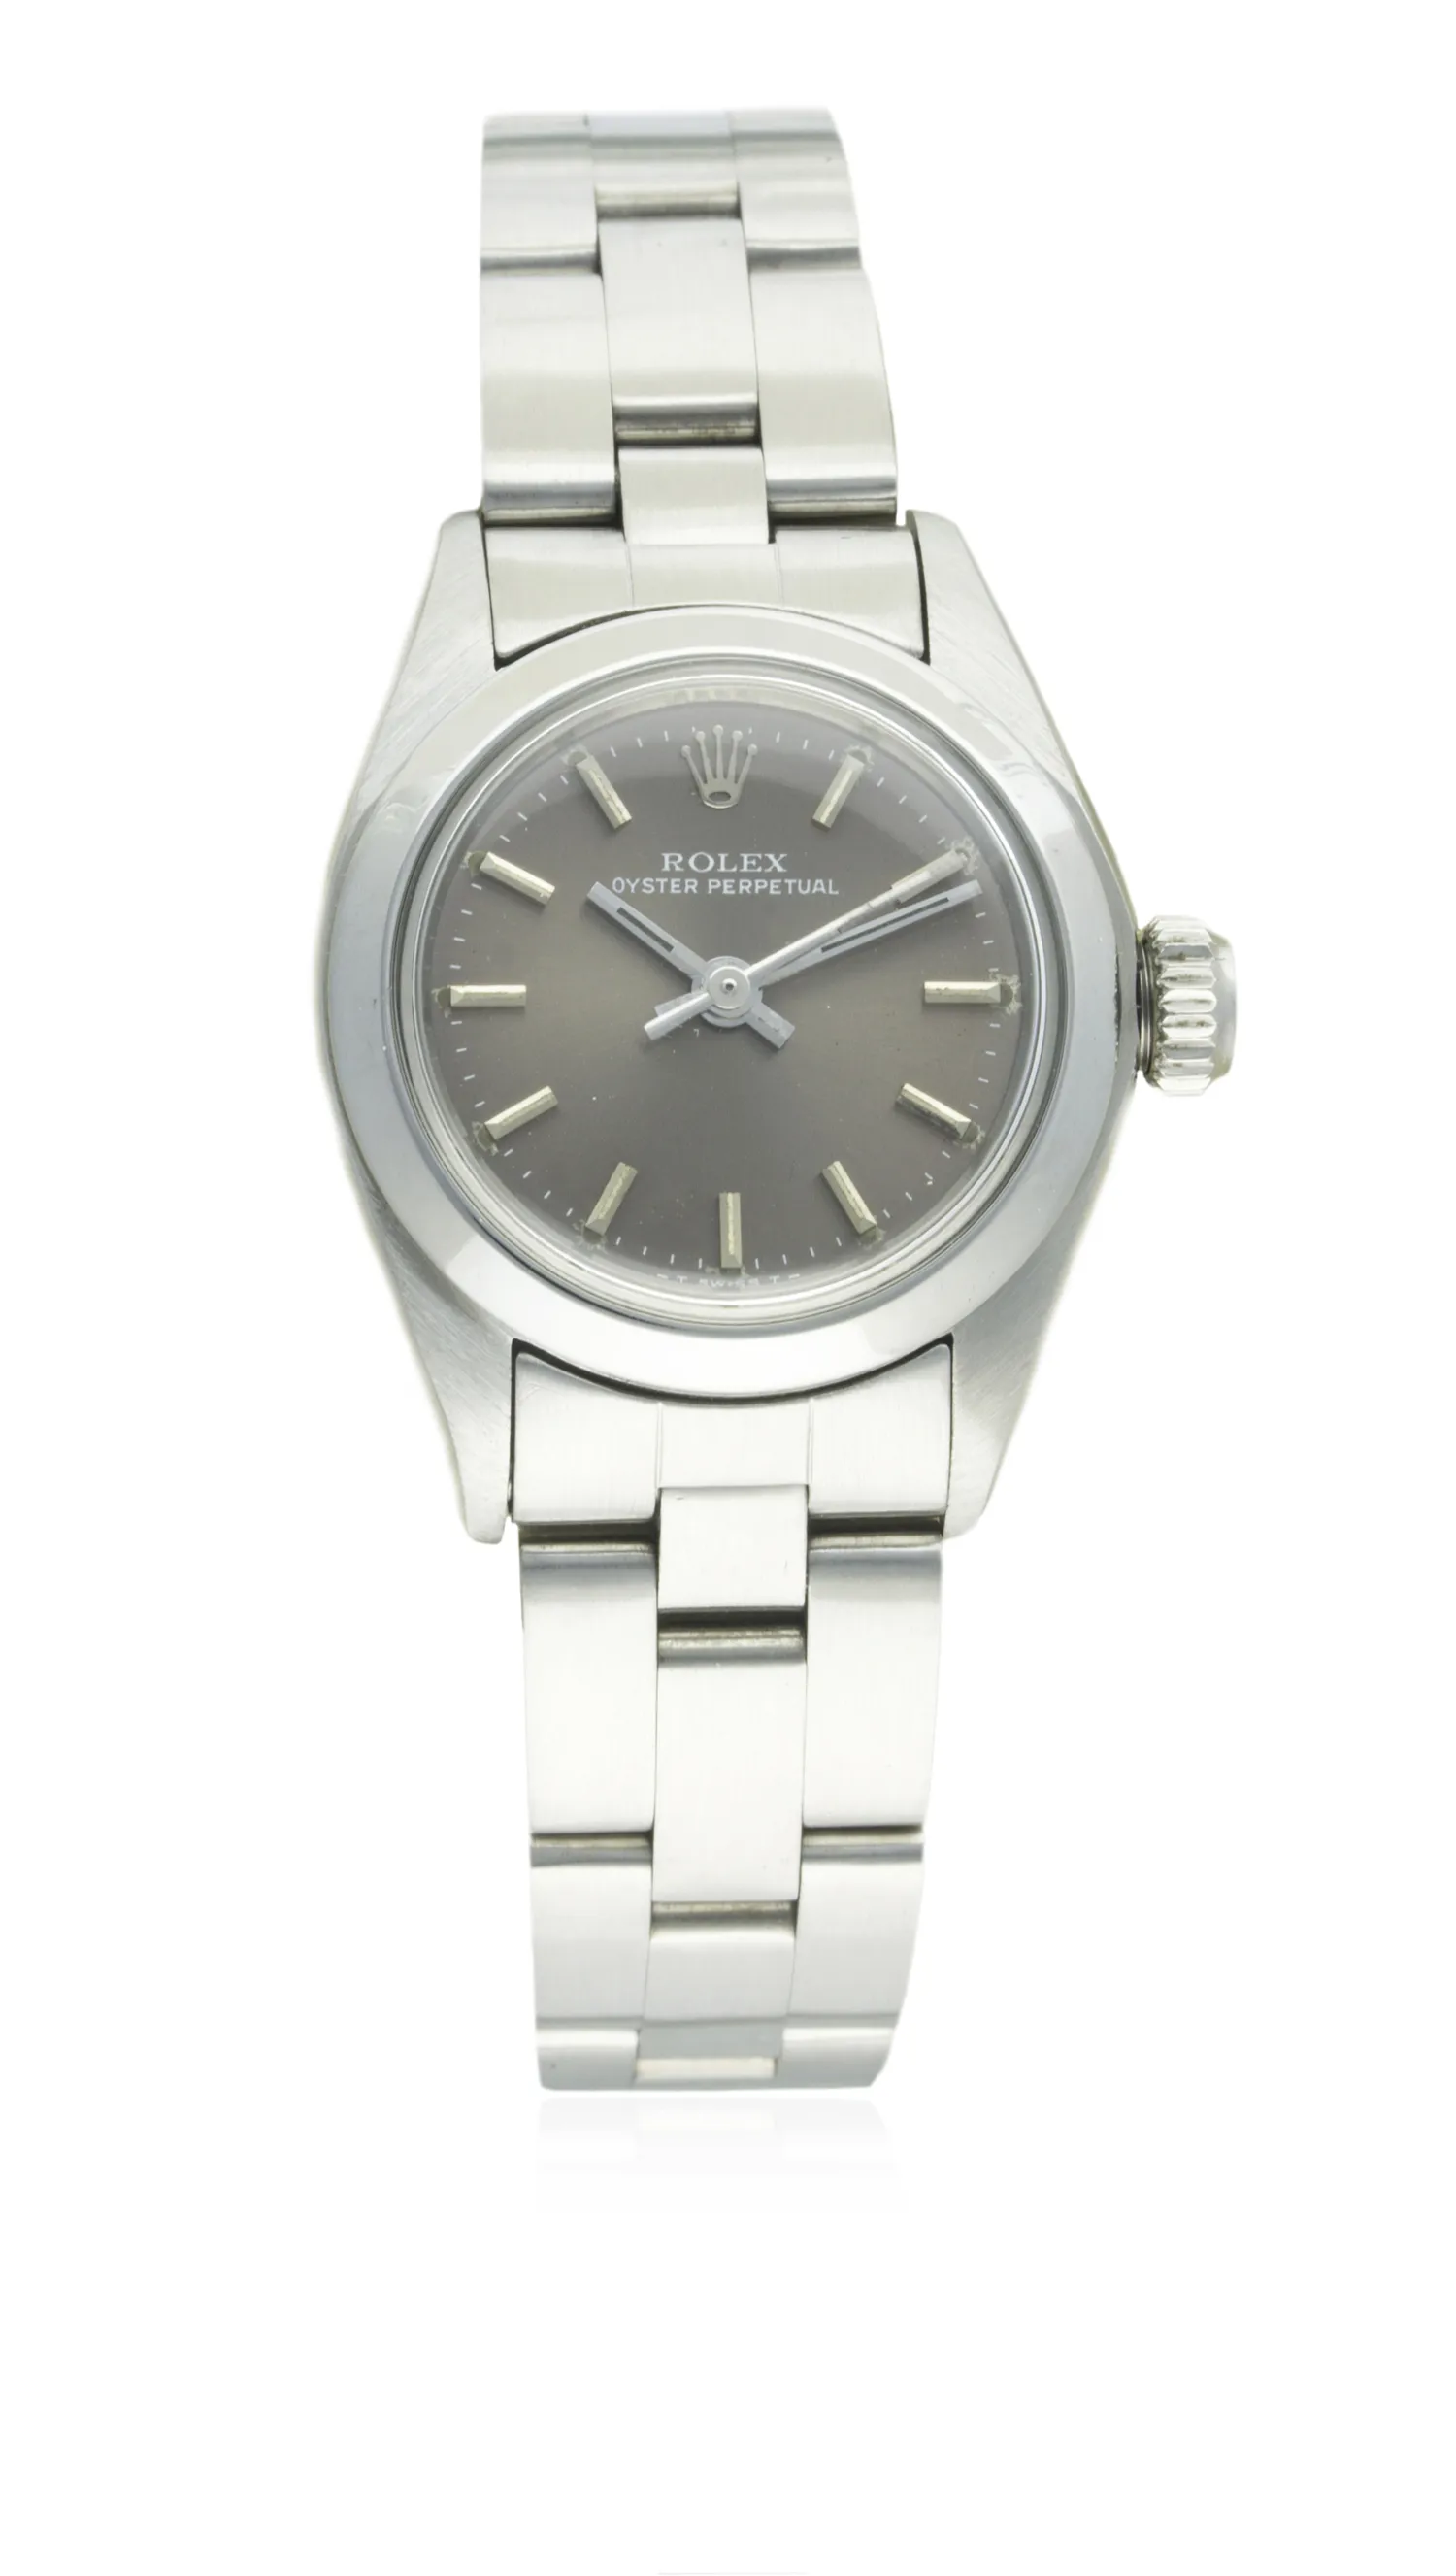 Rolex Oyster Perpetual 26 6718 25mm Stainless steel Grey